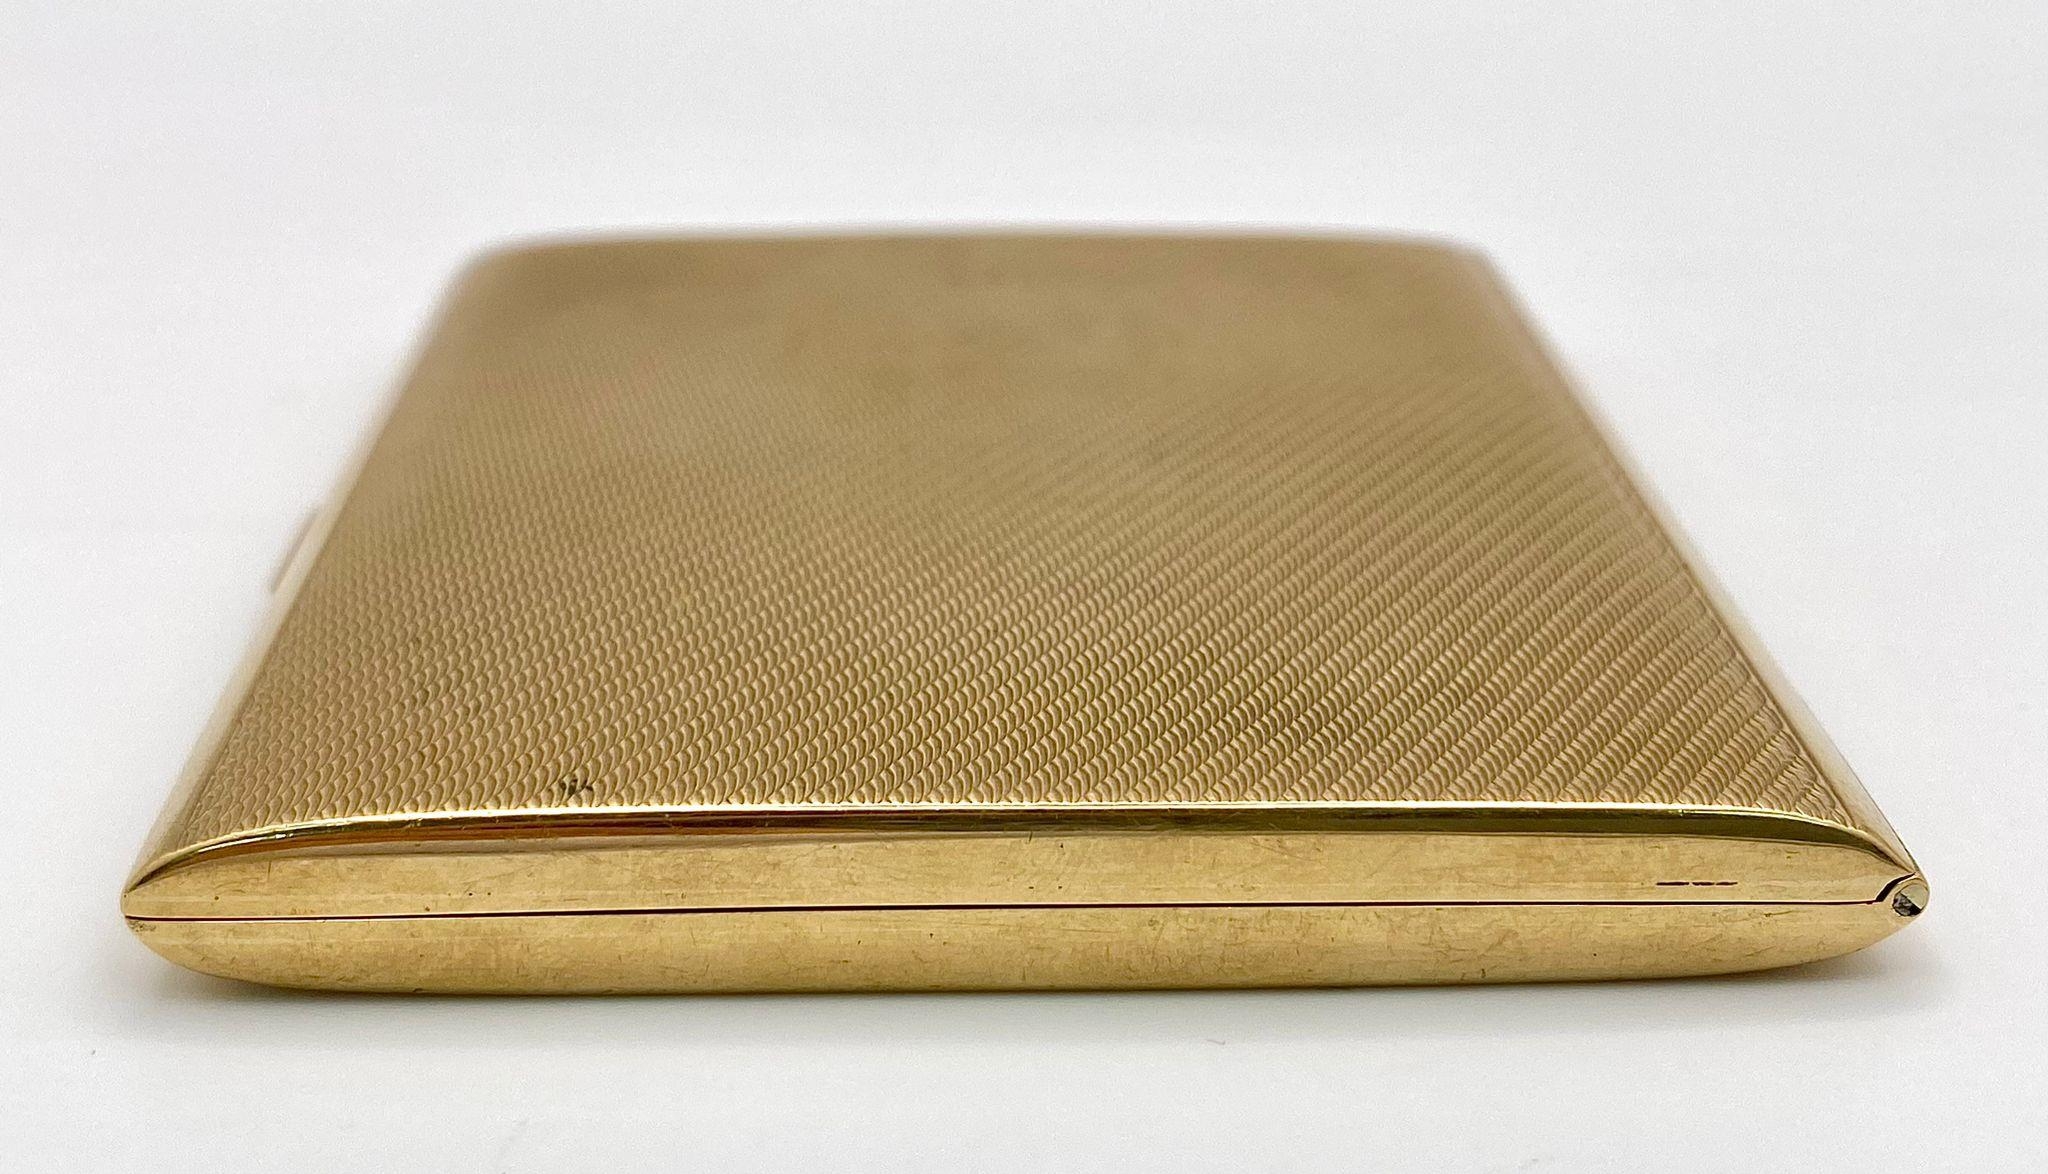 A Vintage 9K Yellow Solid Gold Cigarette Case. 8cm x 7.5cm. 72.9g weight. Full UK hallmarks. - Image 4 of 7